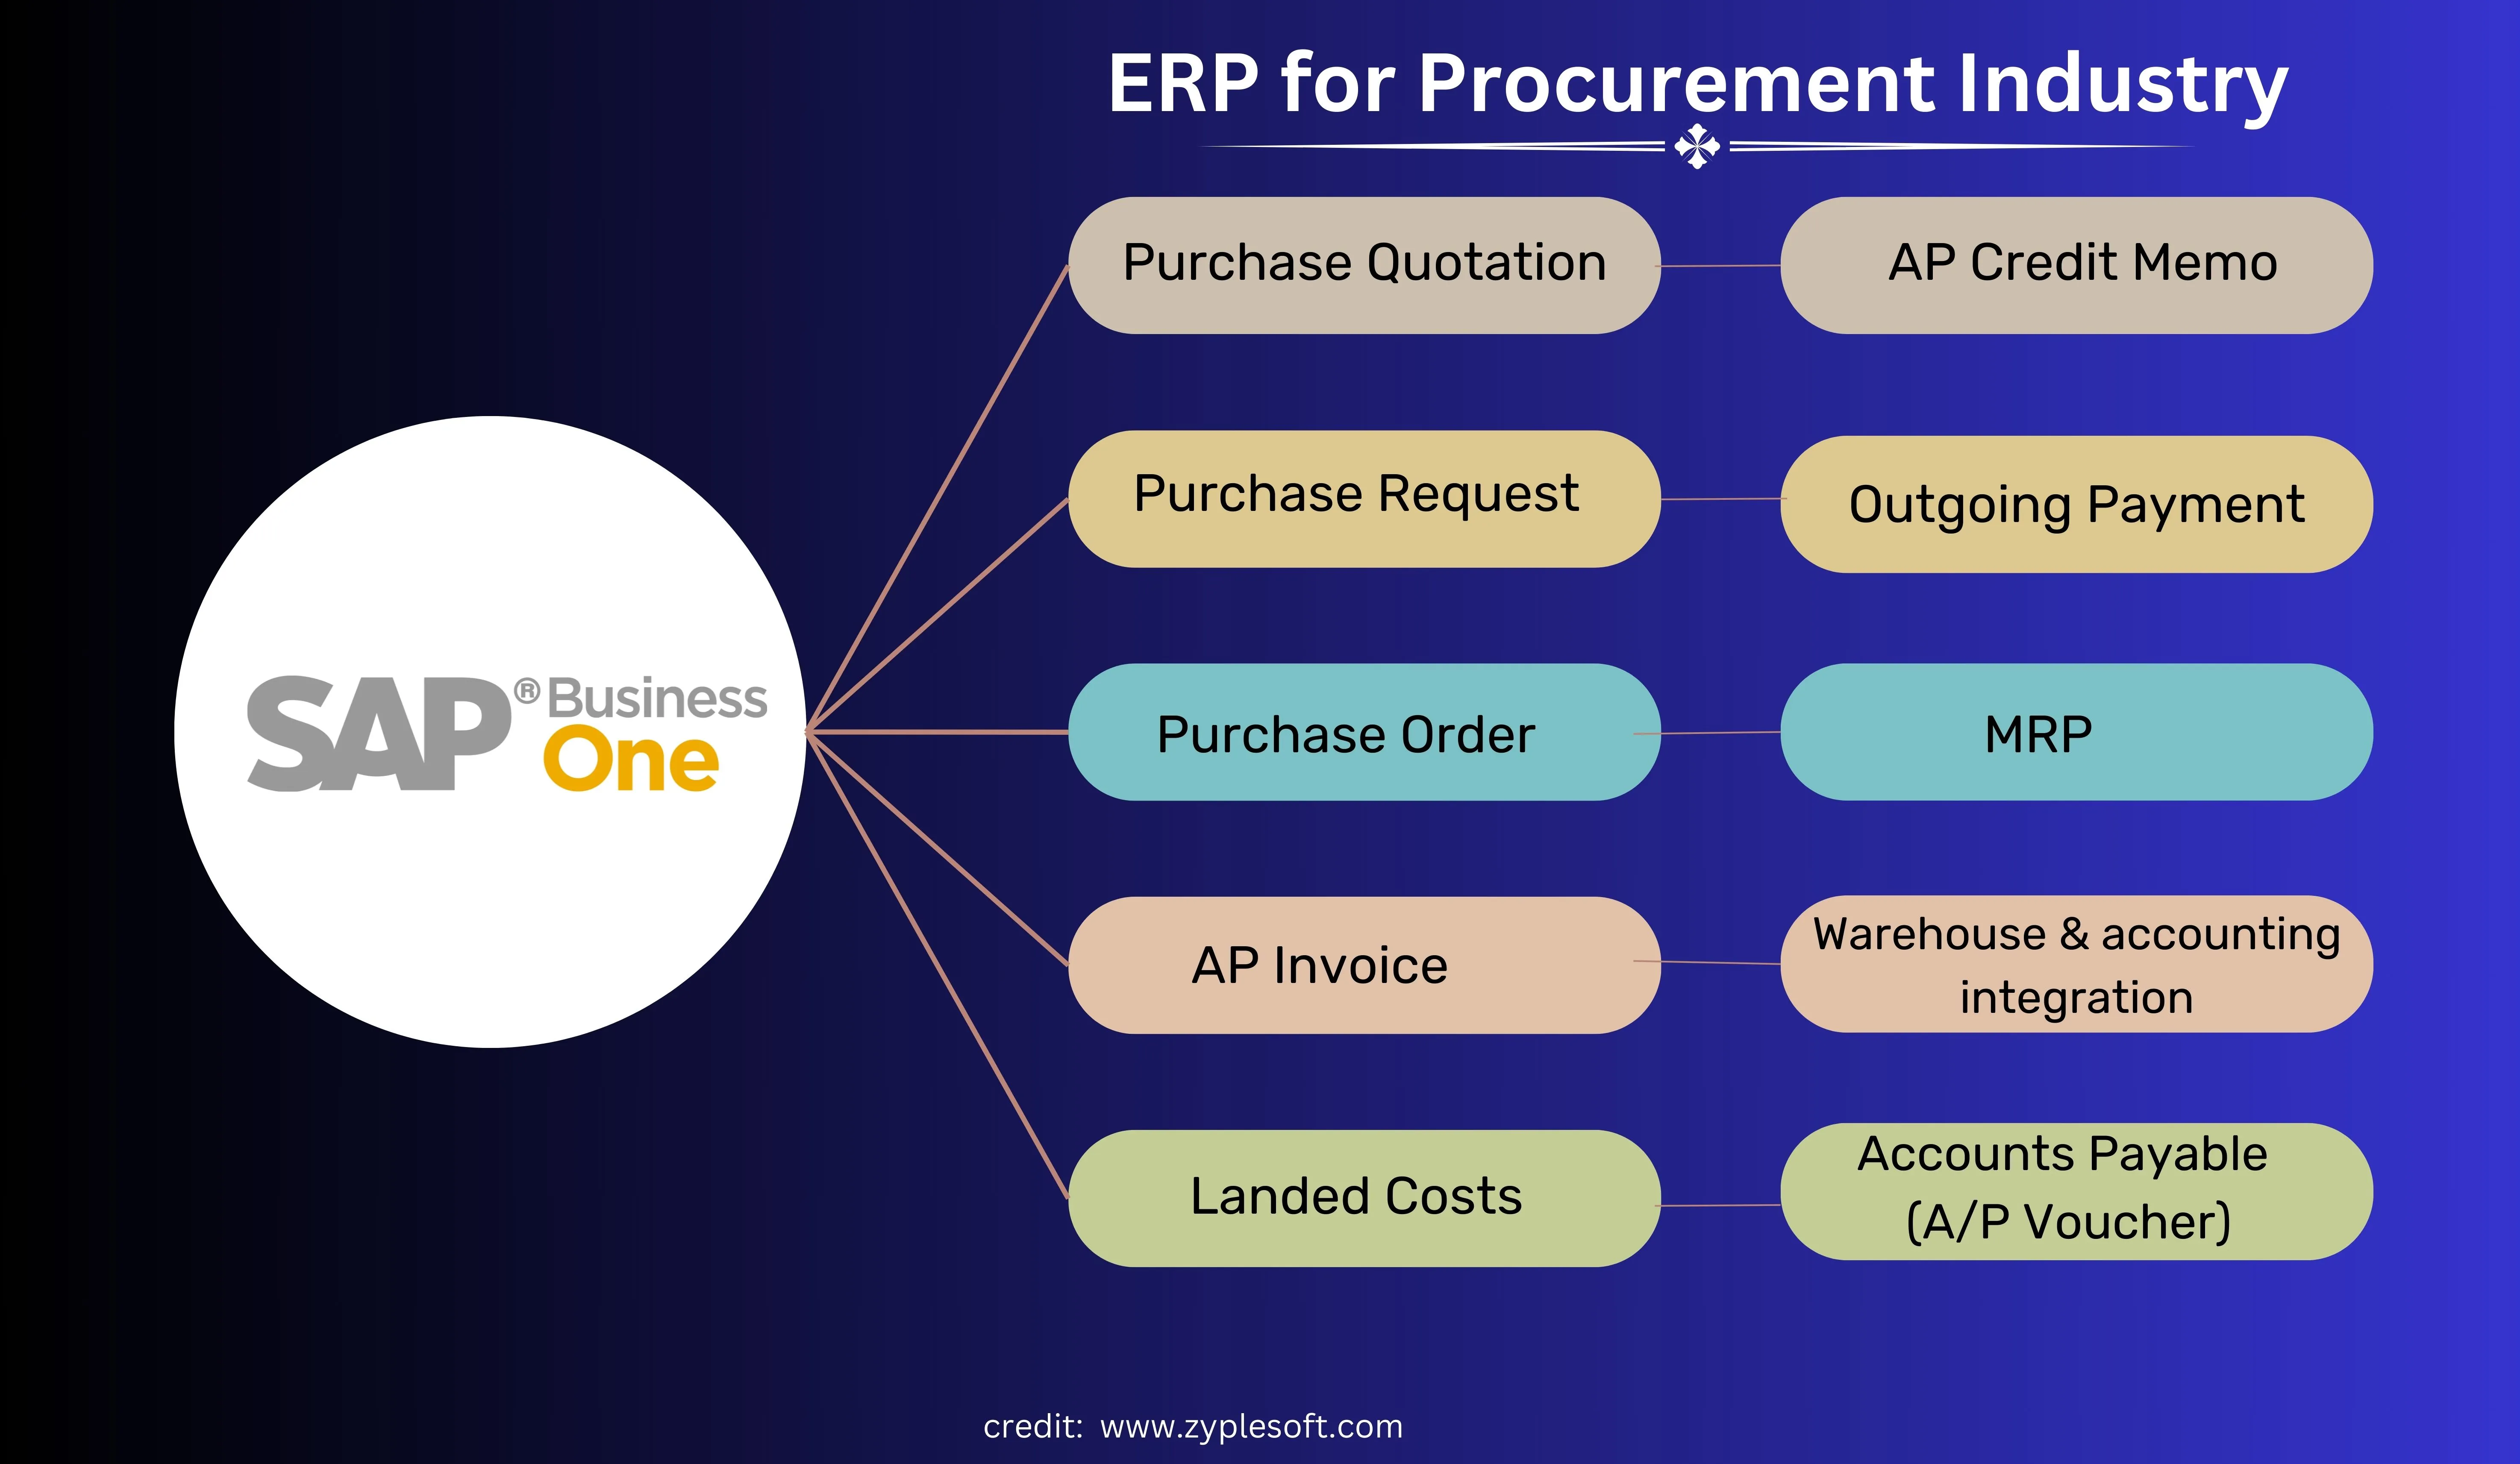 SAP Business One ERP for Procurement Industry